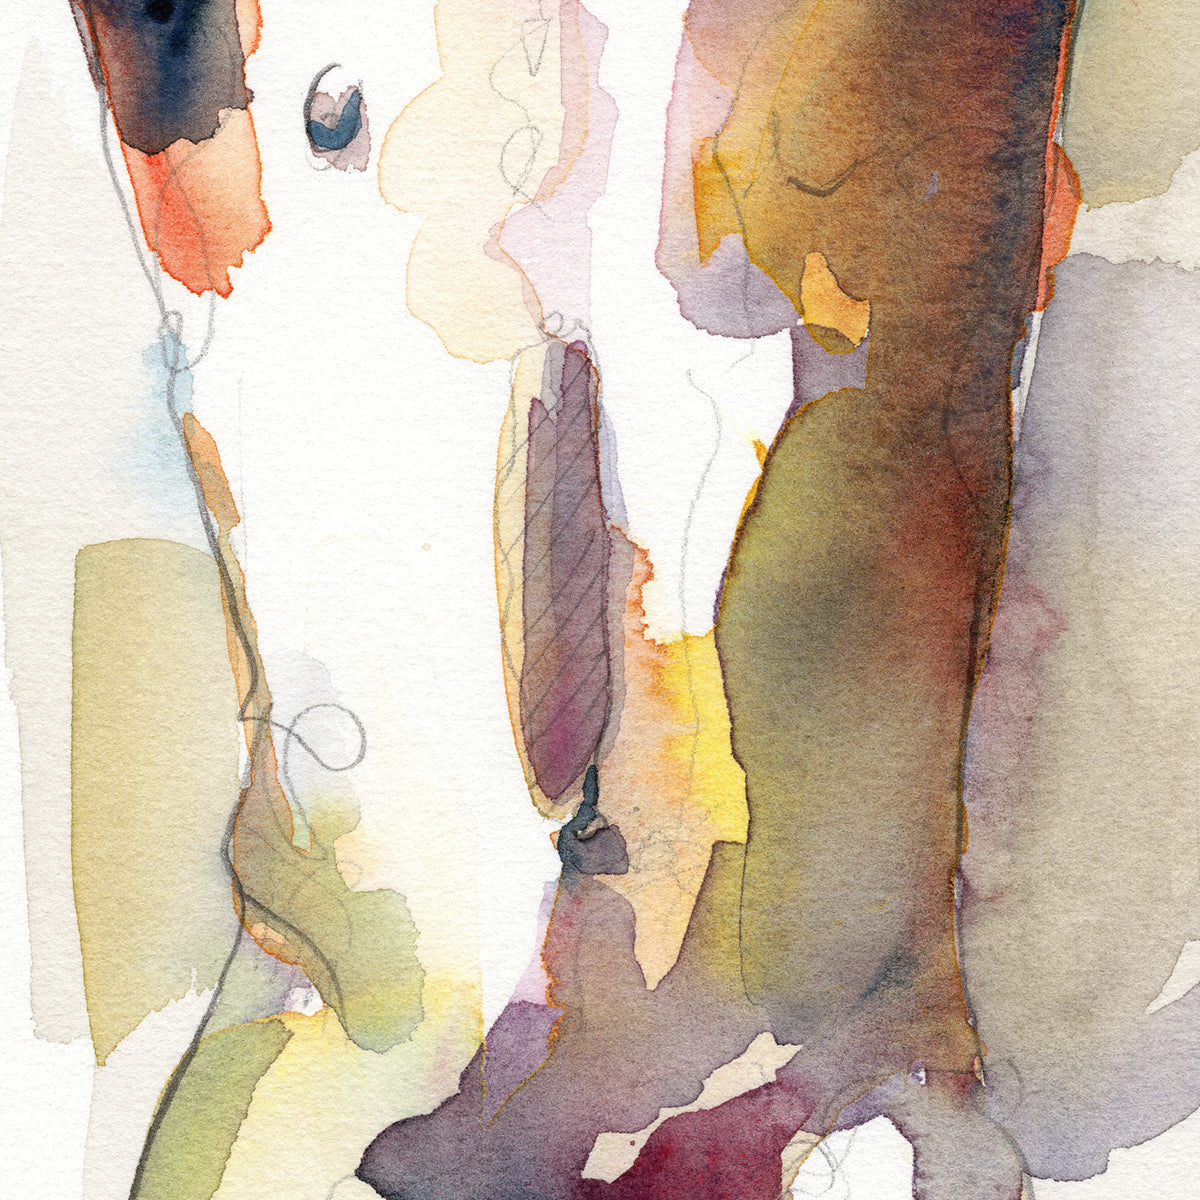 Alluring Nude Male Figure with Striking Profile - 6x9" Original Watercolor Painting